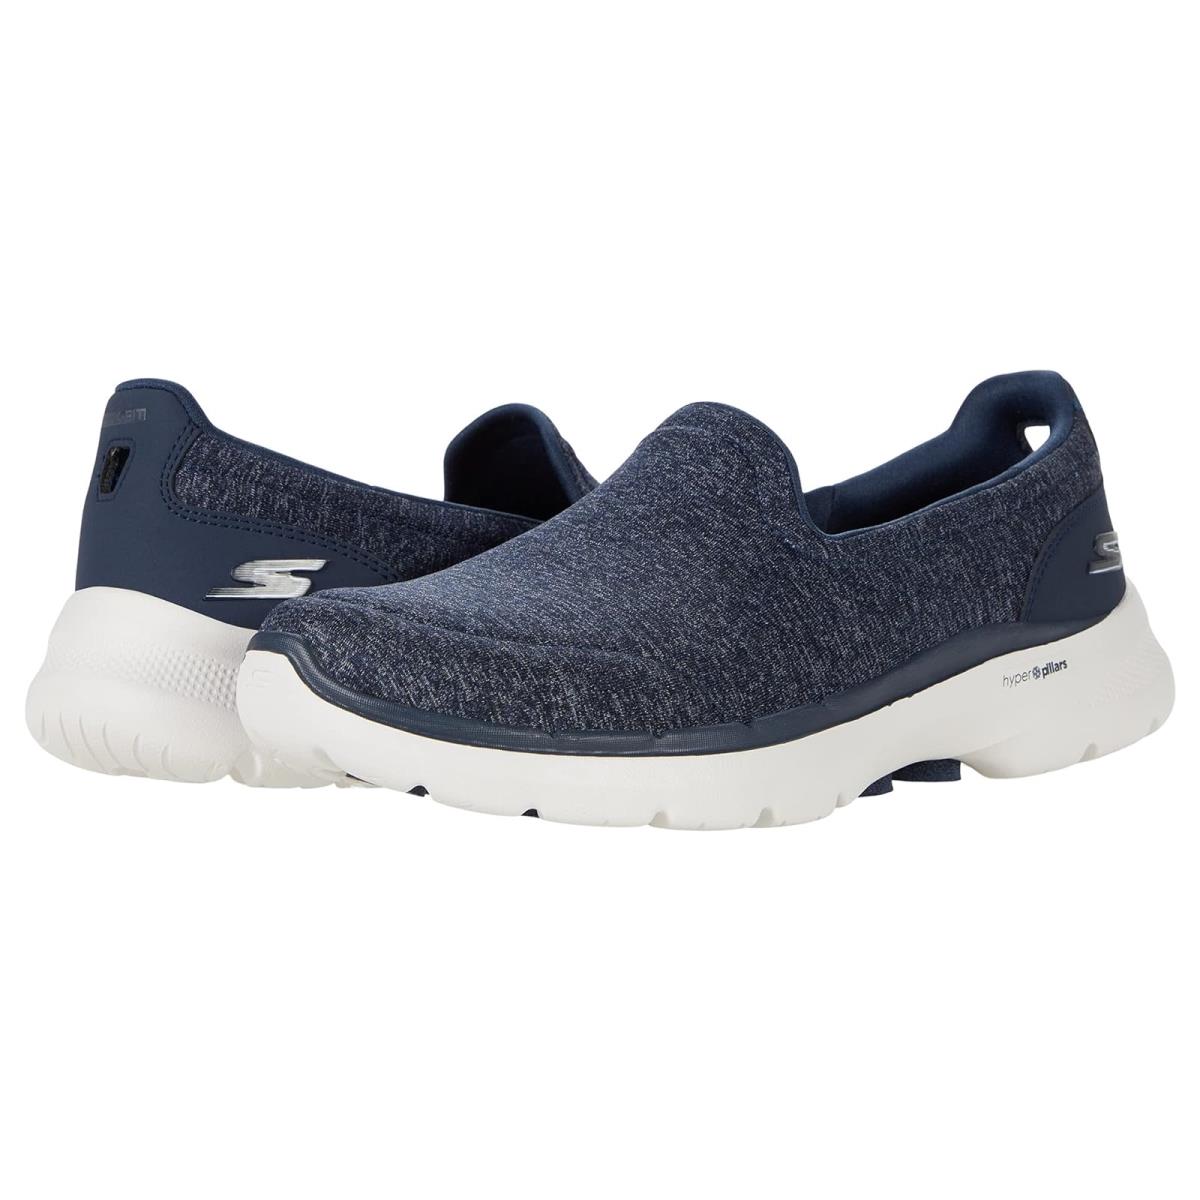 Woman`s Sneakers Athletic Shoes Skechers Performance Go Walk 6 Knight Glow Navy/White